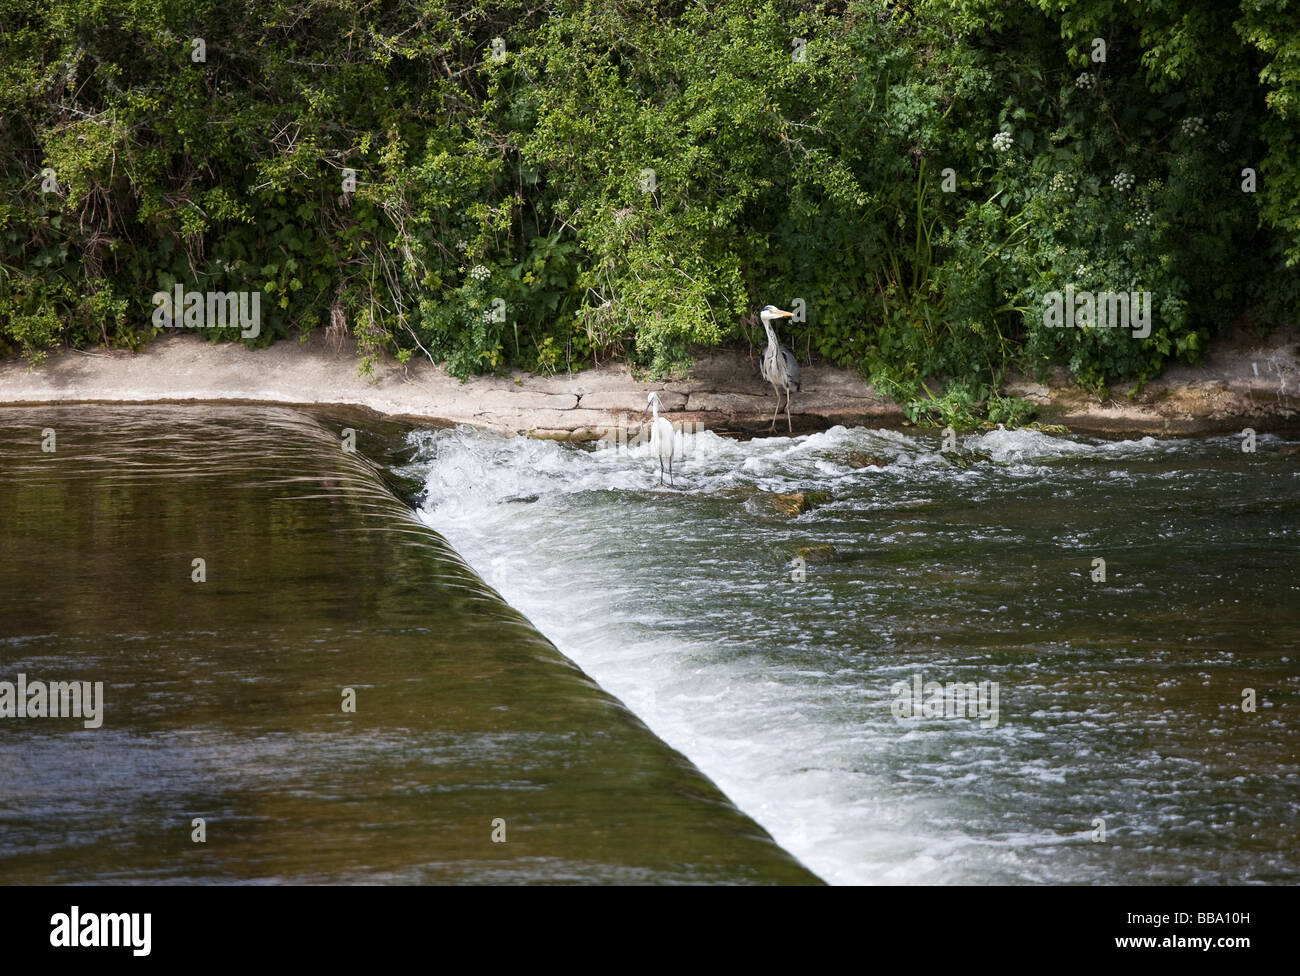 River Stour Weir, Nr Cowgrove, Little Pamphill, in Pamphill, Dorset with egret and heron basking in sunshine Stock Photo